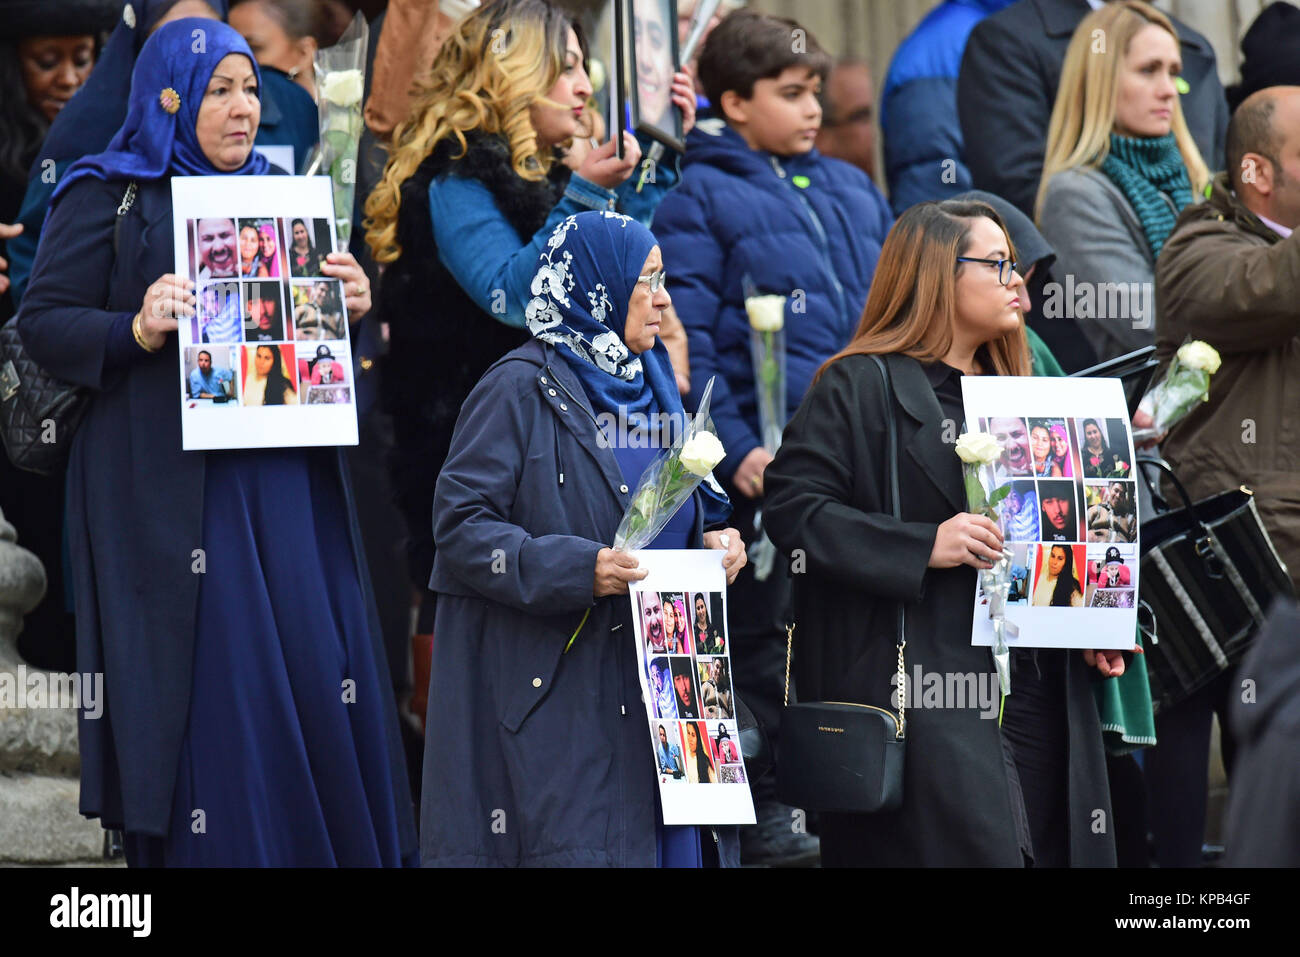 People hold photos and flowers as they leave after the Grenfell Tower National Memorial Service at St Paul's Cathedral in London, to mark the six month anniversary of the Grenfell Tower fire. Stock Photo